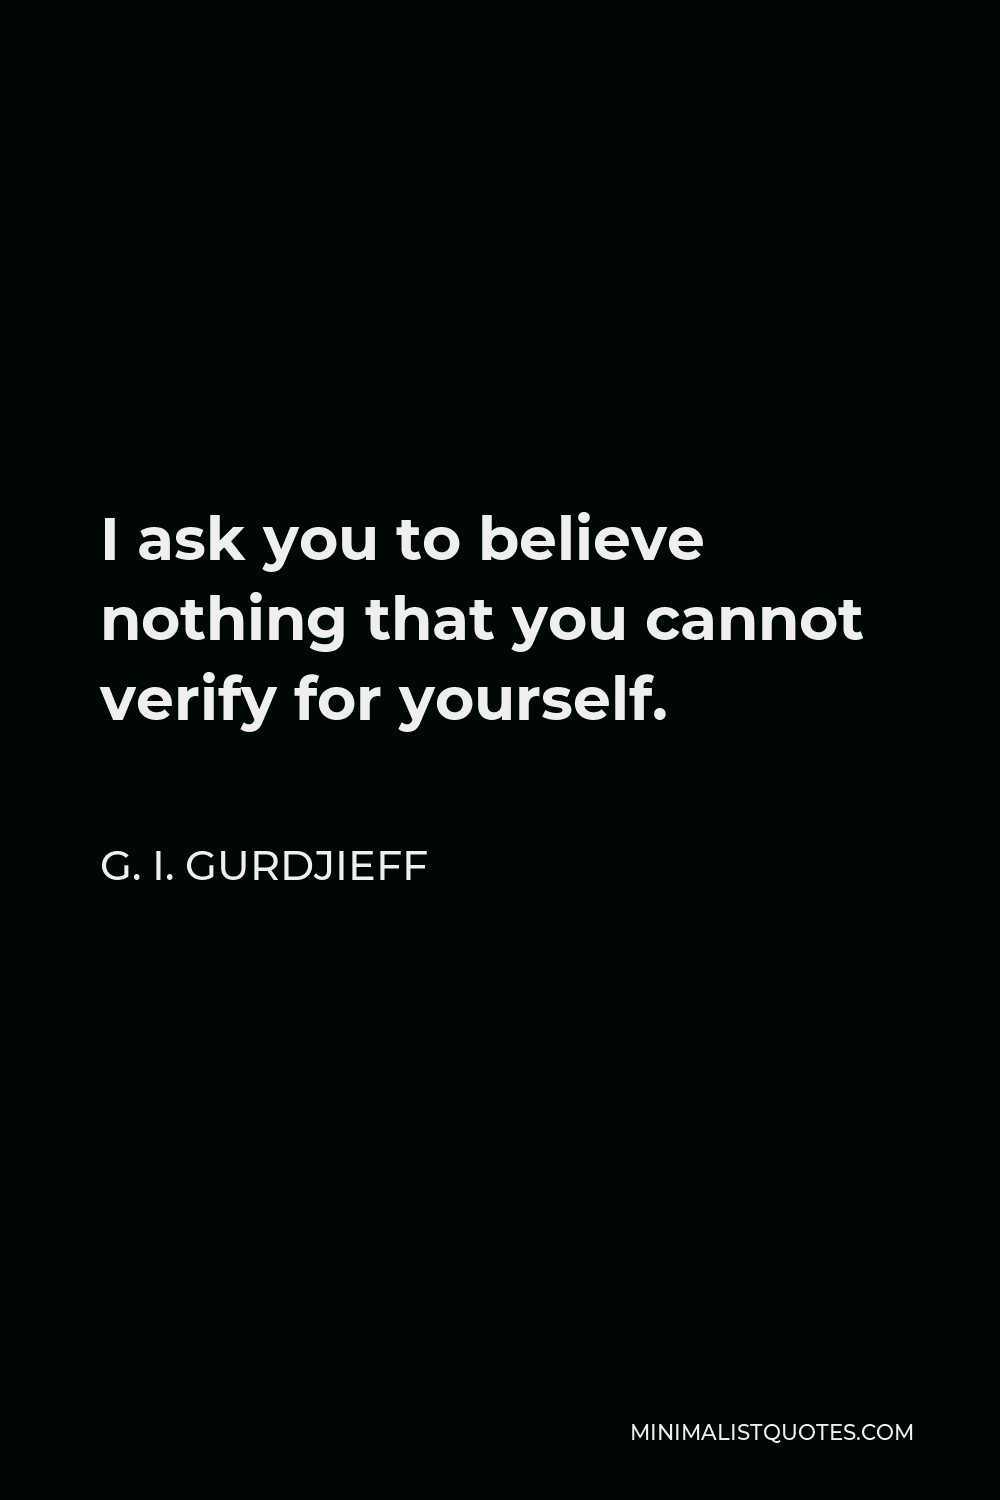 G. I. Gurdjieff Quote - I ask you to believe nothing that you cannot verify for yourself.